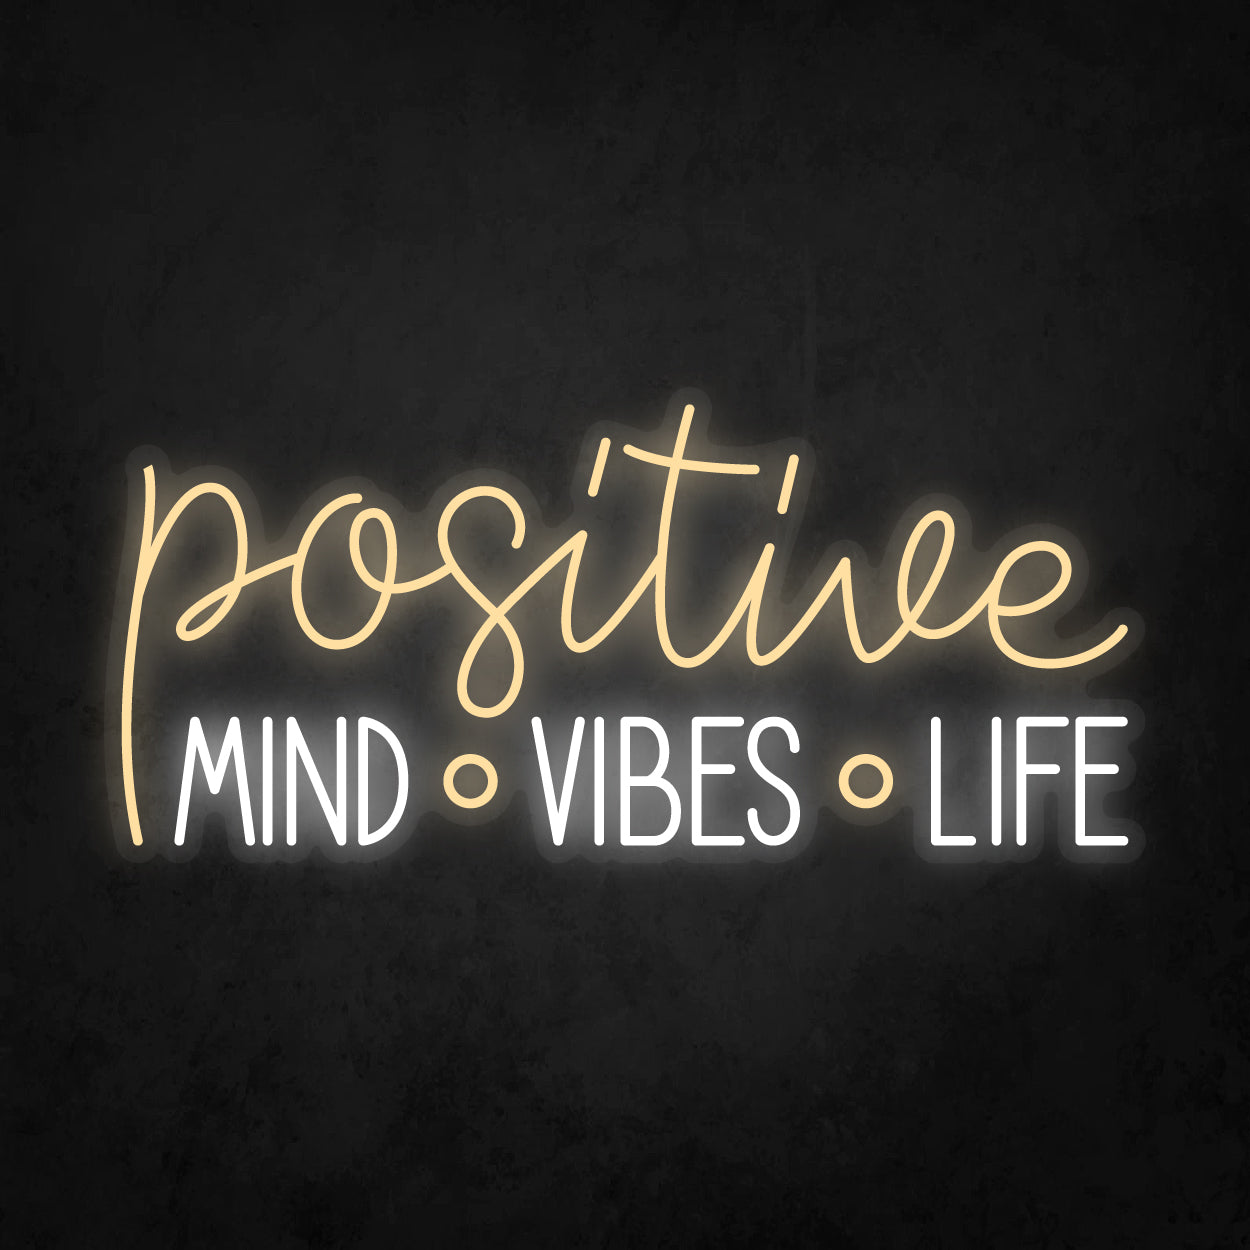 LED Neon Sign - Positive Mind, Vibes, Life